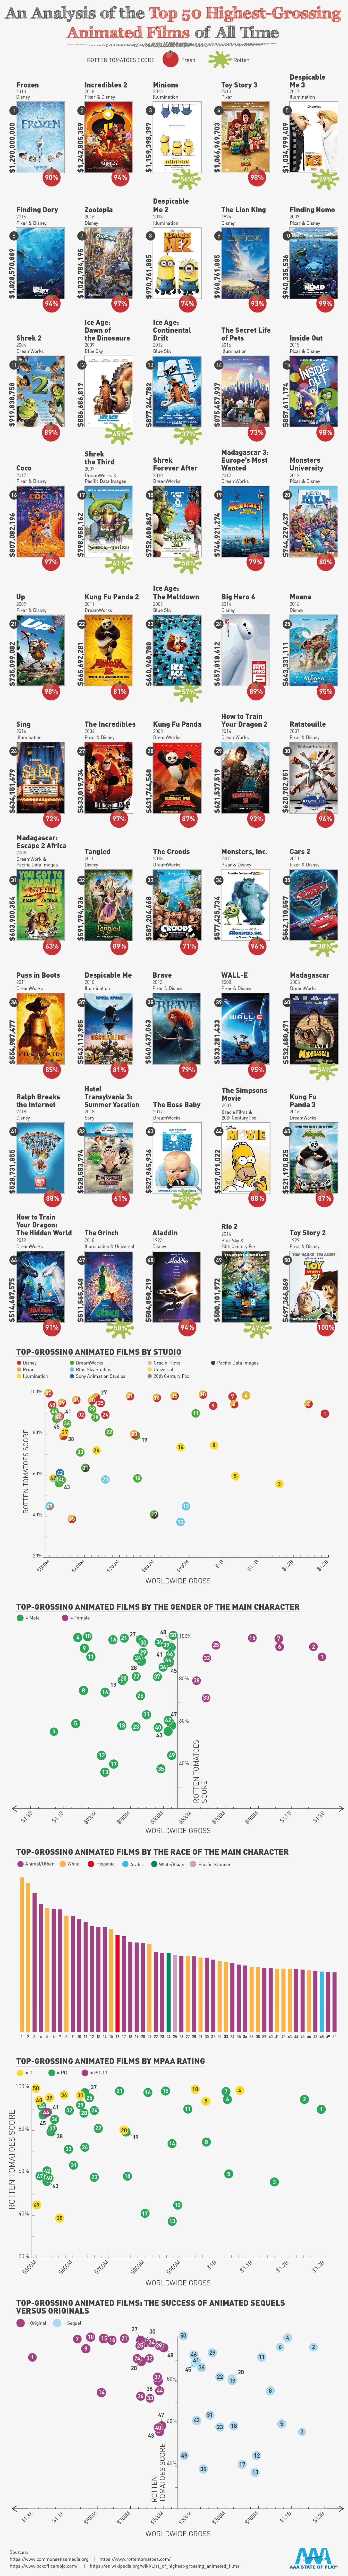 The Top 50 Animated Movies Of All Time | Daily Infographic